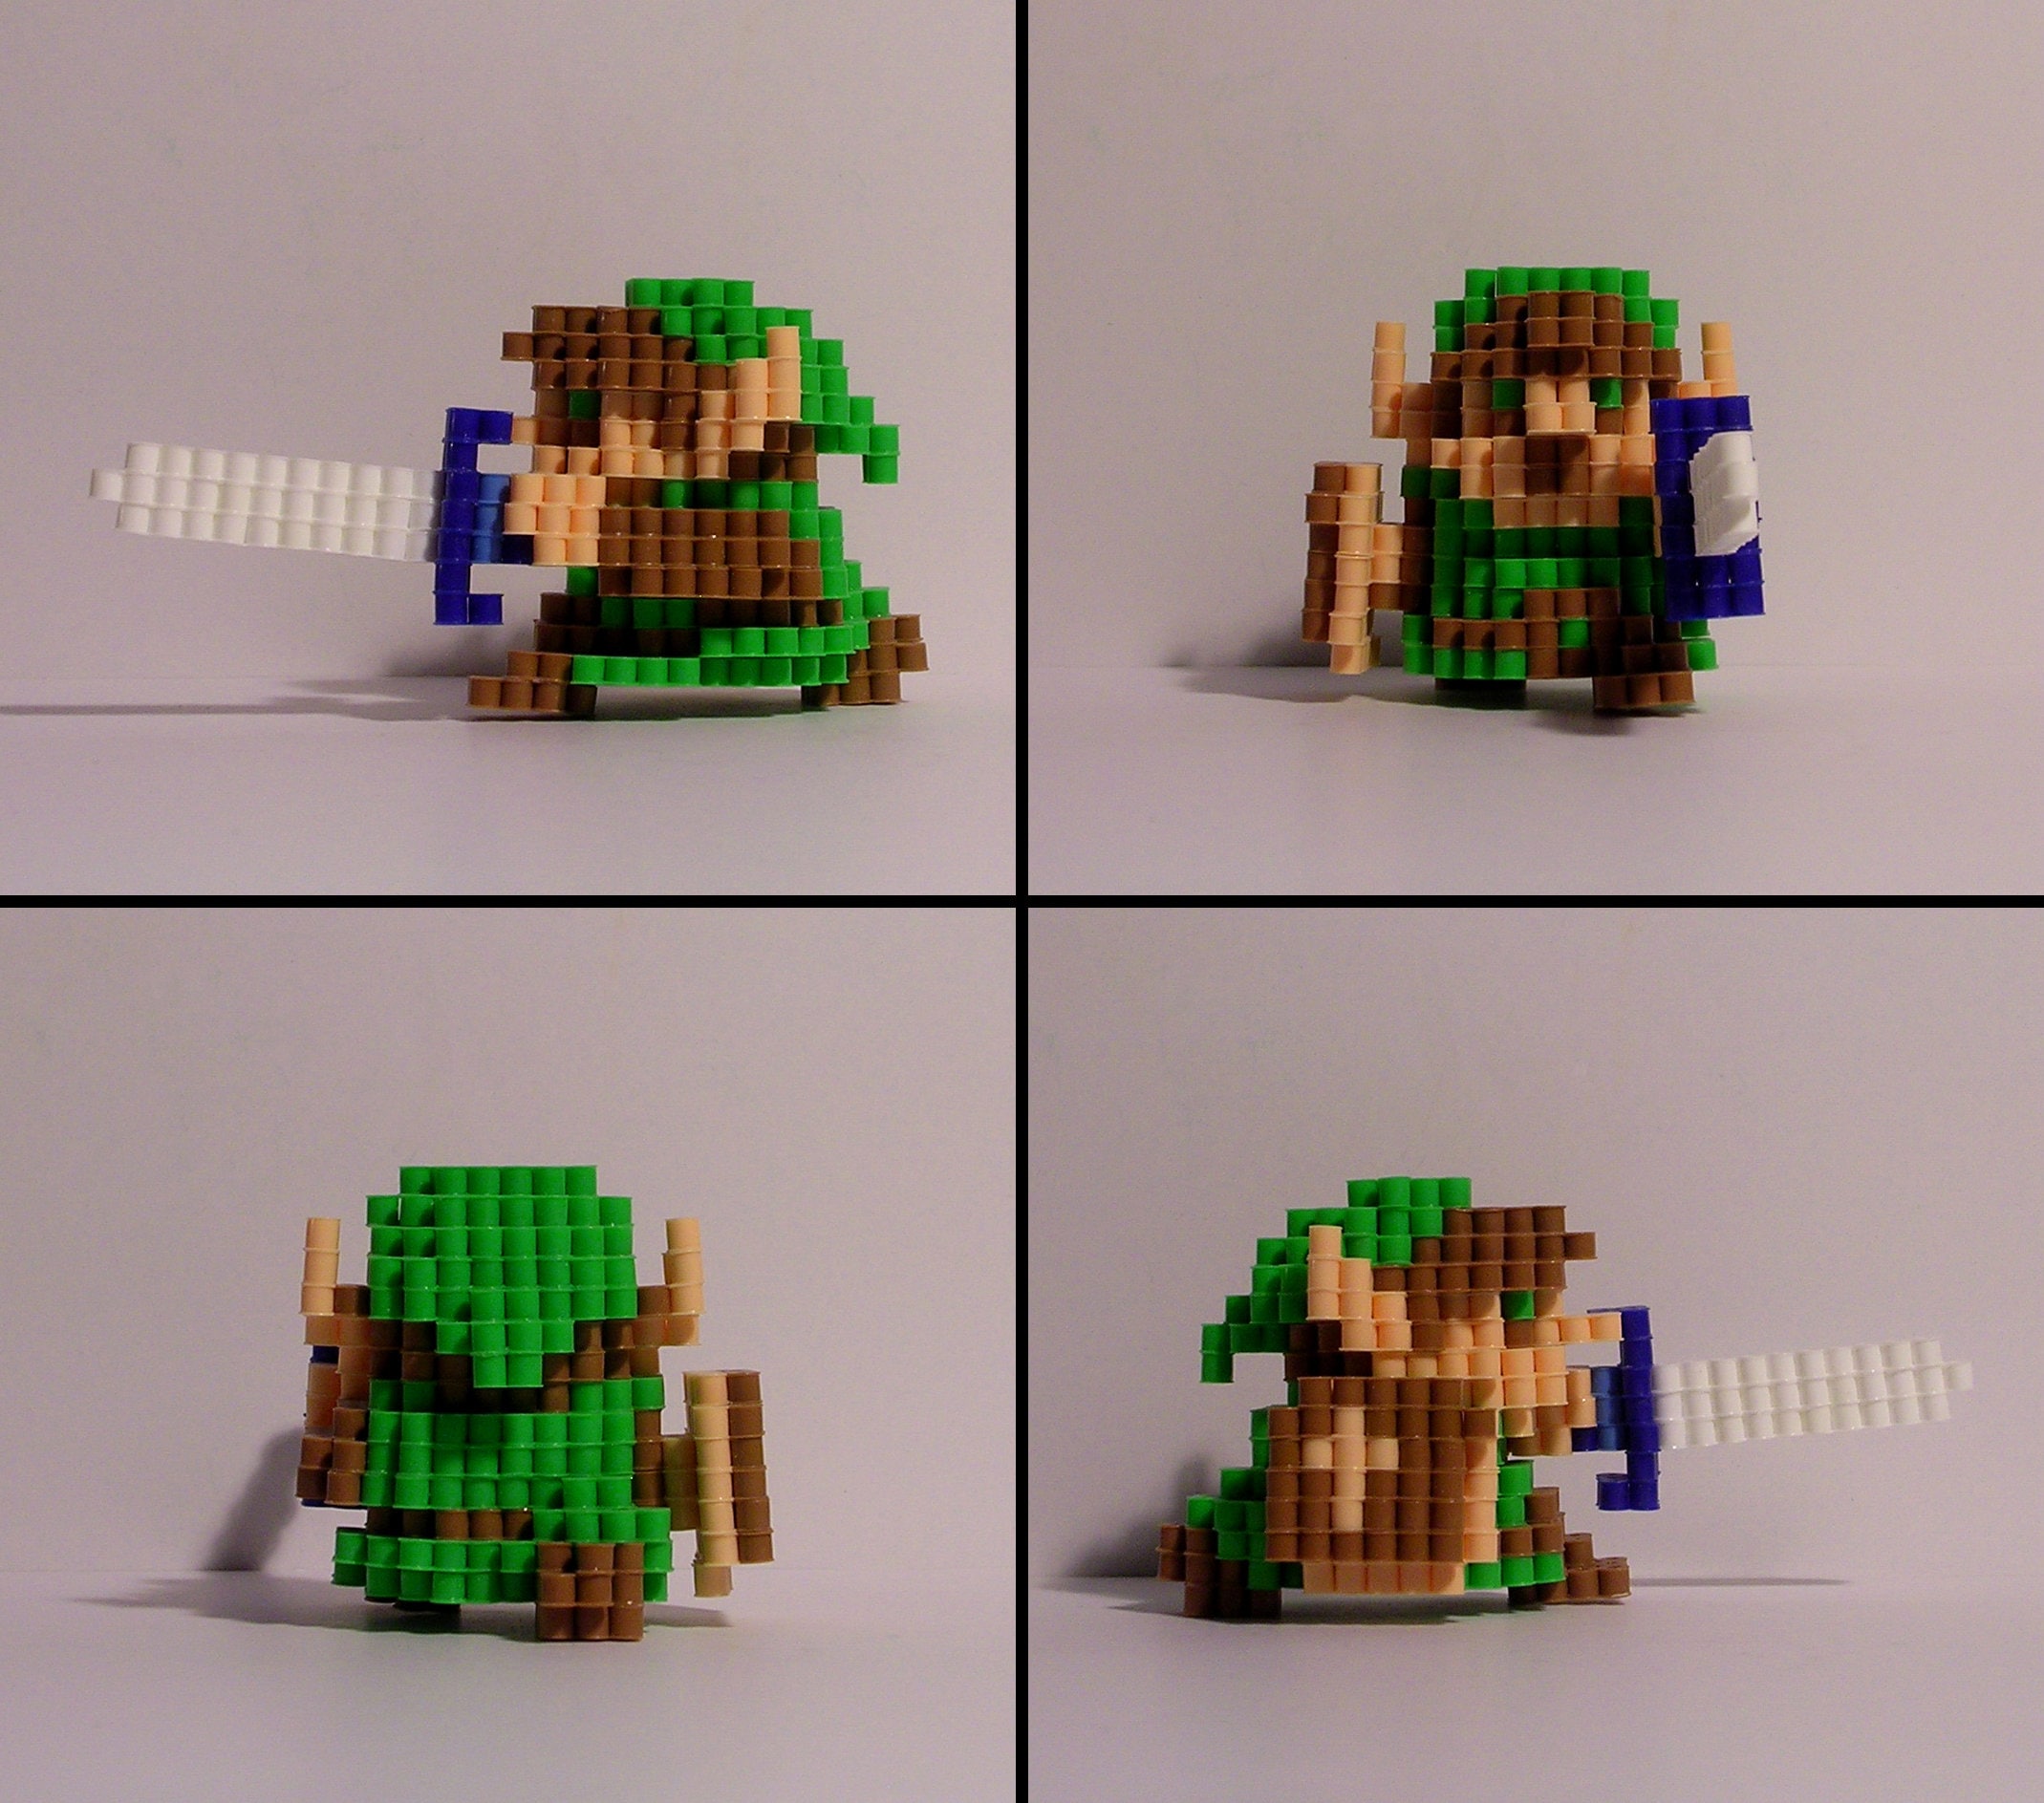 The Pixel of Zelda: Link, Lego sprite mosaic of Link from T…